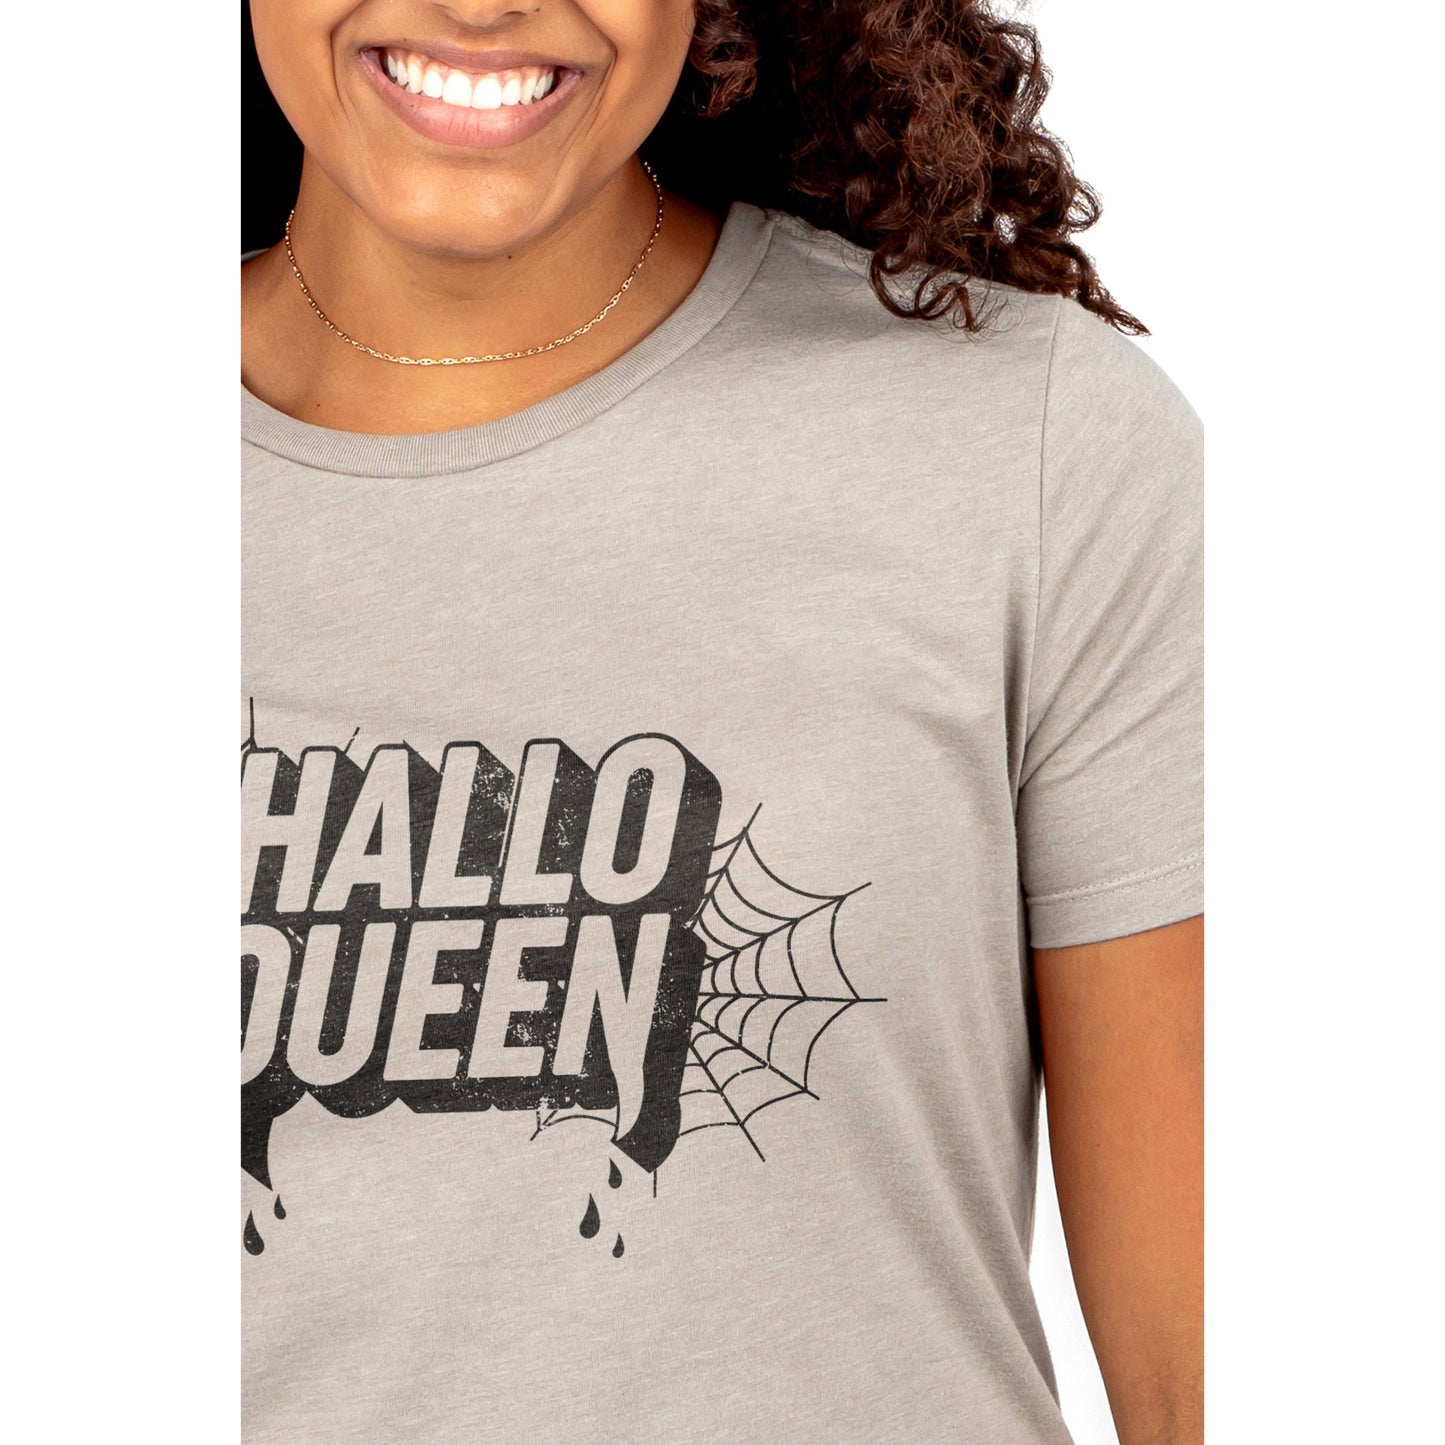 Hallo Queen - thread tank | Stories you can wear.